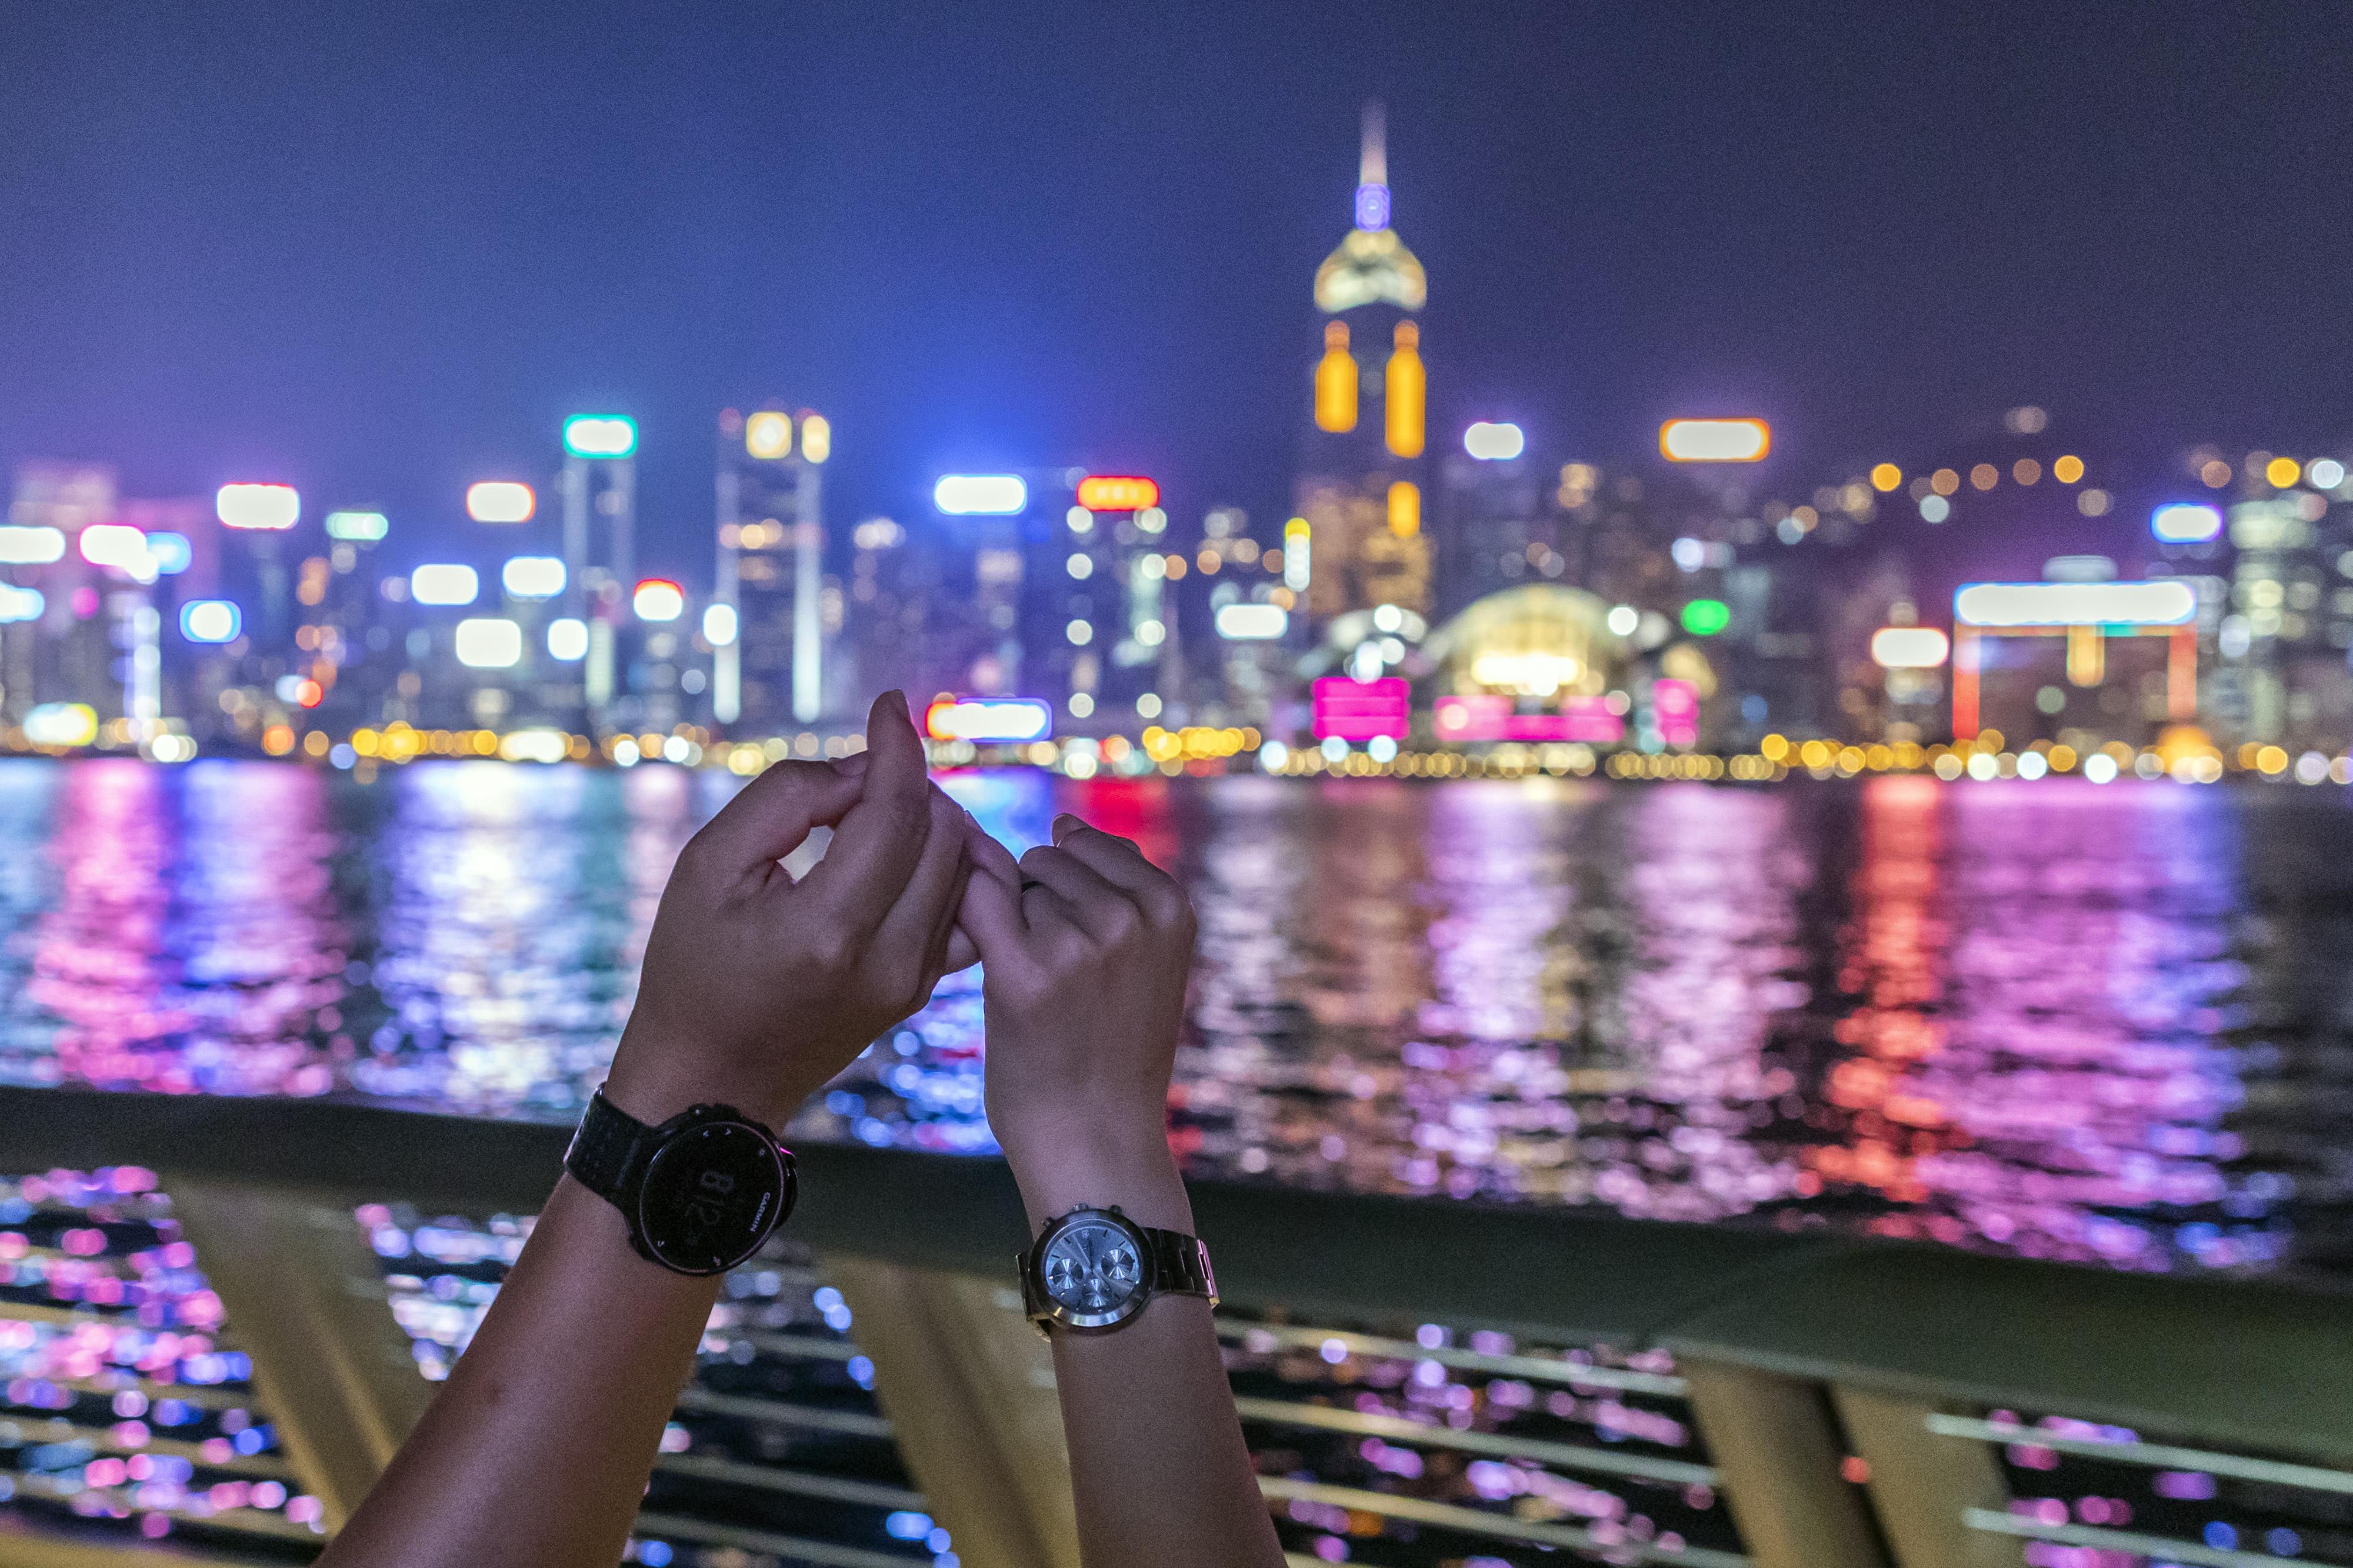 Demonstrators join hands to form a human chain during the Hong Kong Way event in the Tsim Sha Tsui district of Hong Kong, China, on Friday, Aug. 23, 2019. (Justin Chin/Bloomberg via Getty Images)